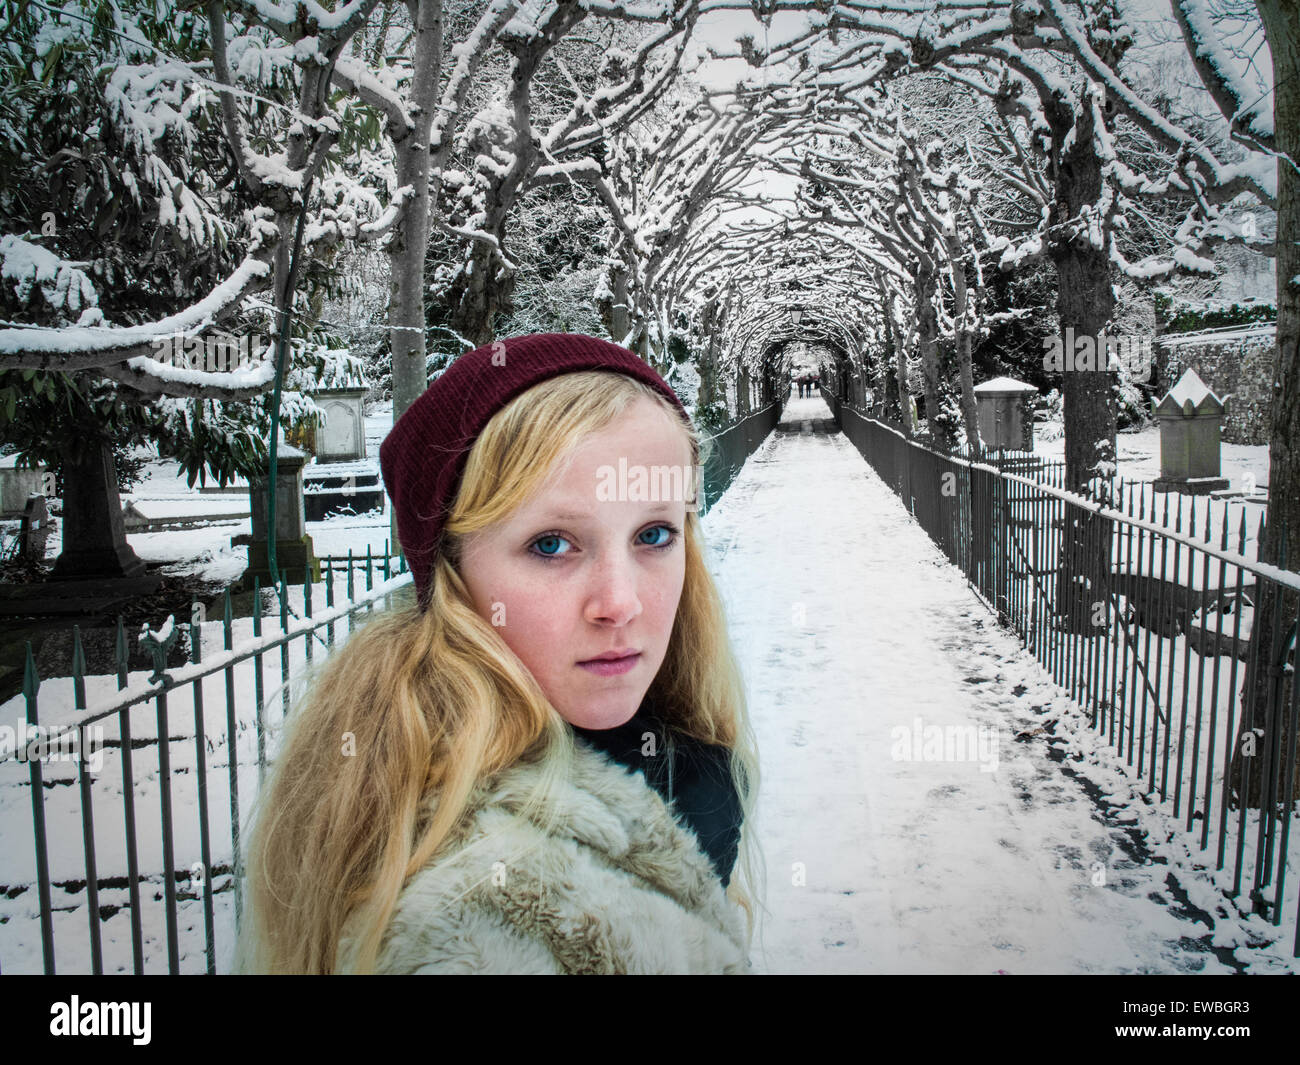 Girl at entrance to 'Birdcage walk' in Clifton, Bristol, on cold winters day Stock Photo